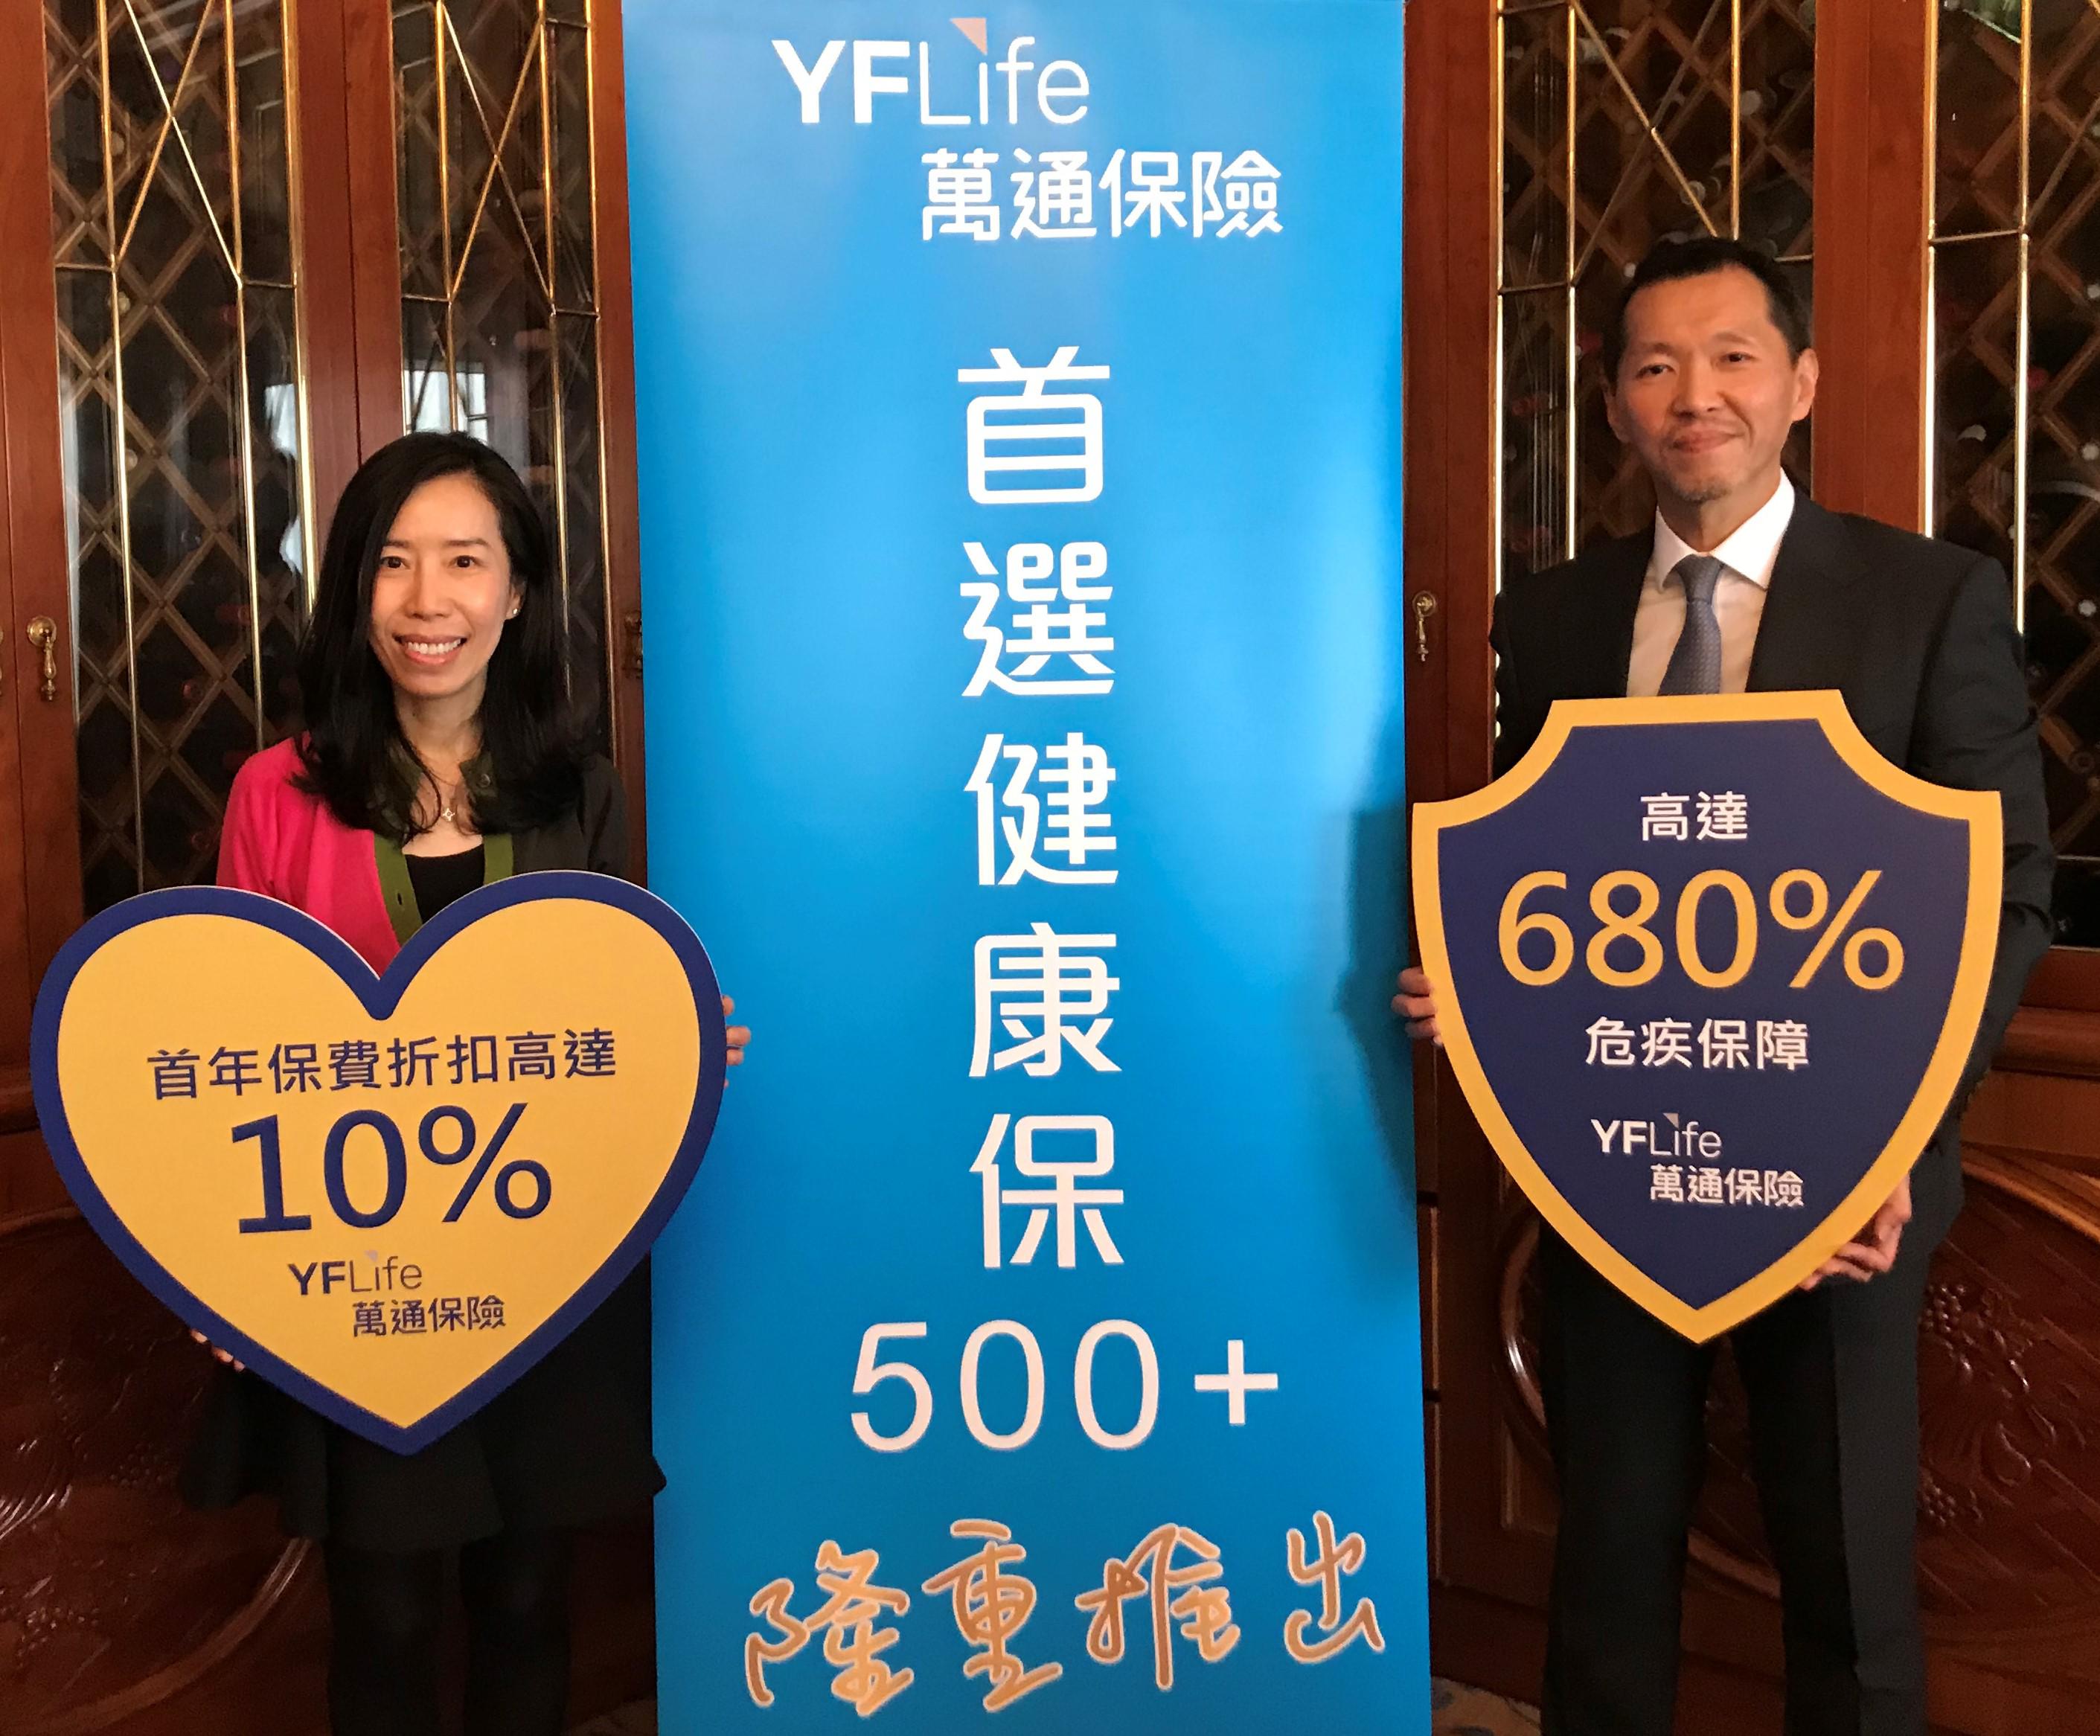 Ms Jeanne Sau, Chief Marketing Officer (left), and Mr Victor Yip, Chief Operating Officer & Chief Actuary of YF Life (right), announce the launch of “PrimeHealth Saver 500+”.